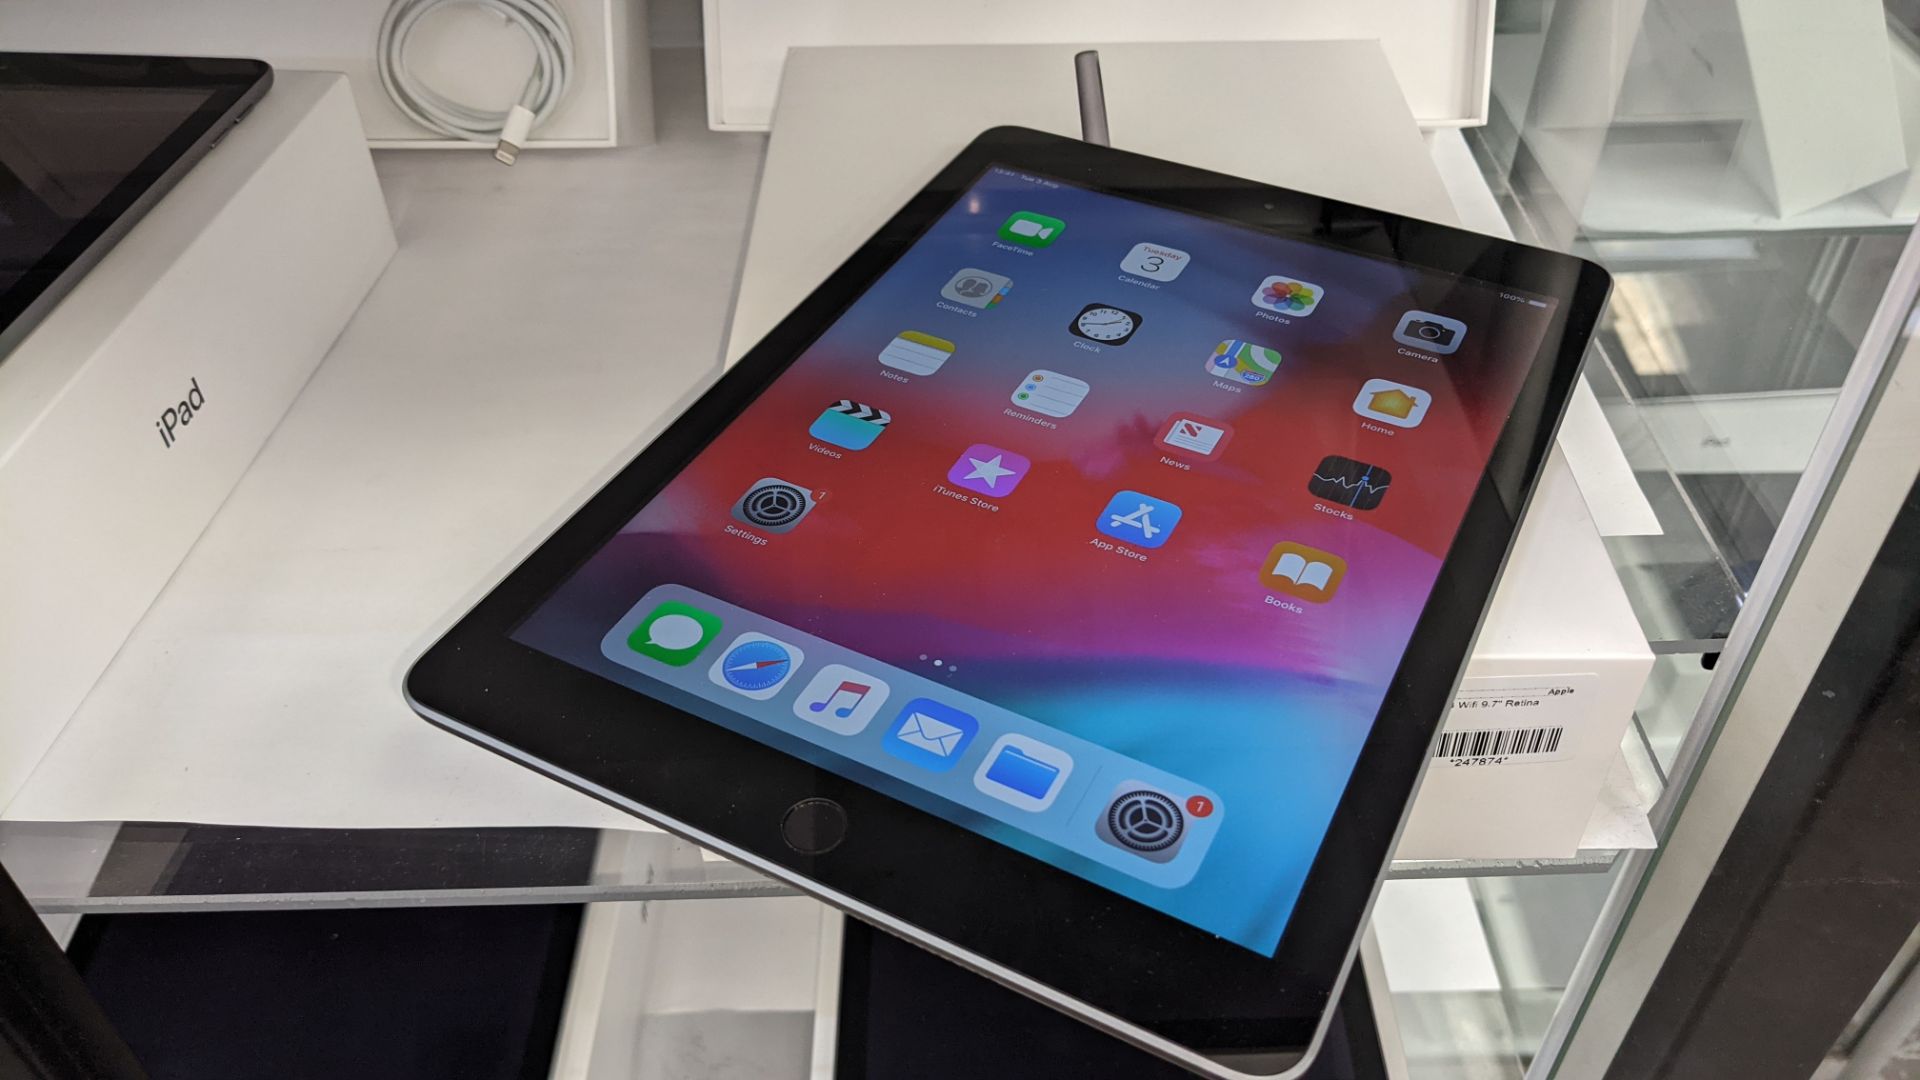 Apple iPad (space grey) 5th generation 32Gb Wi-Fi 9.7" Retina screen. Product code A1822. Apple A9 - Image 5 of 11